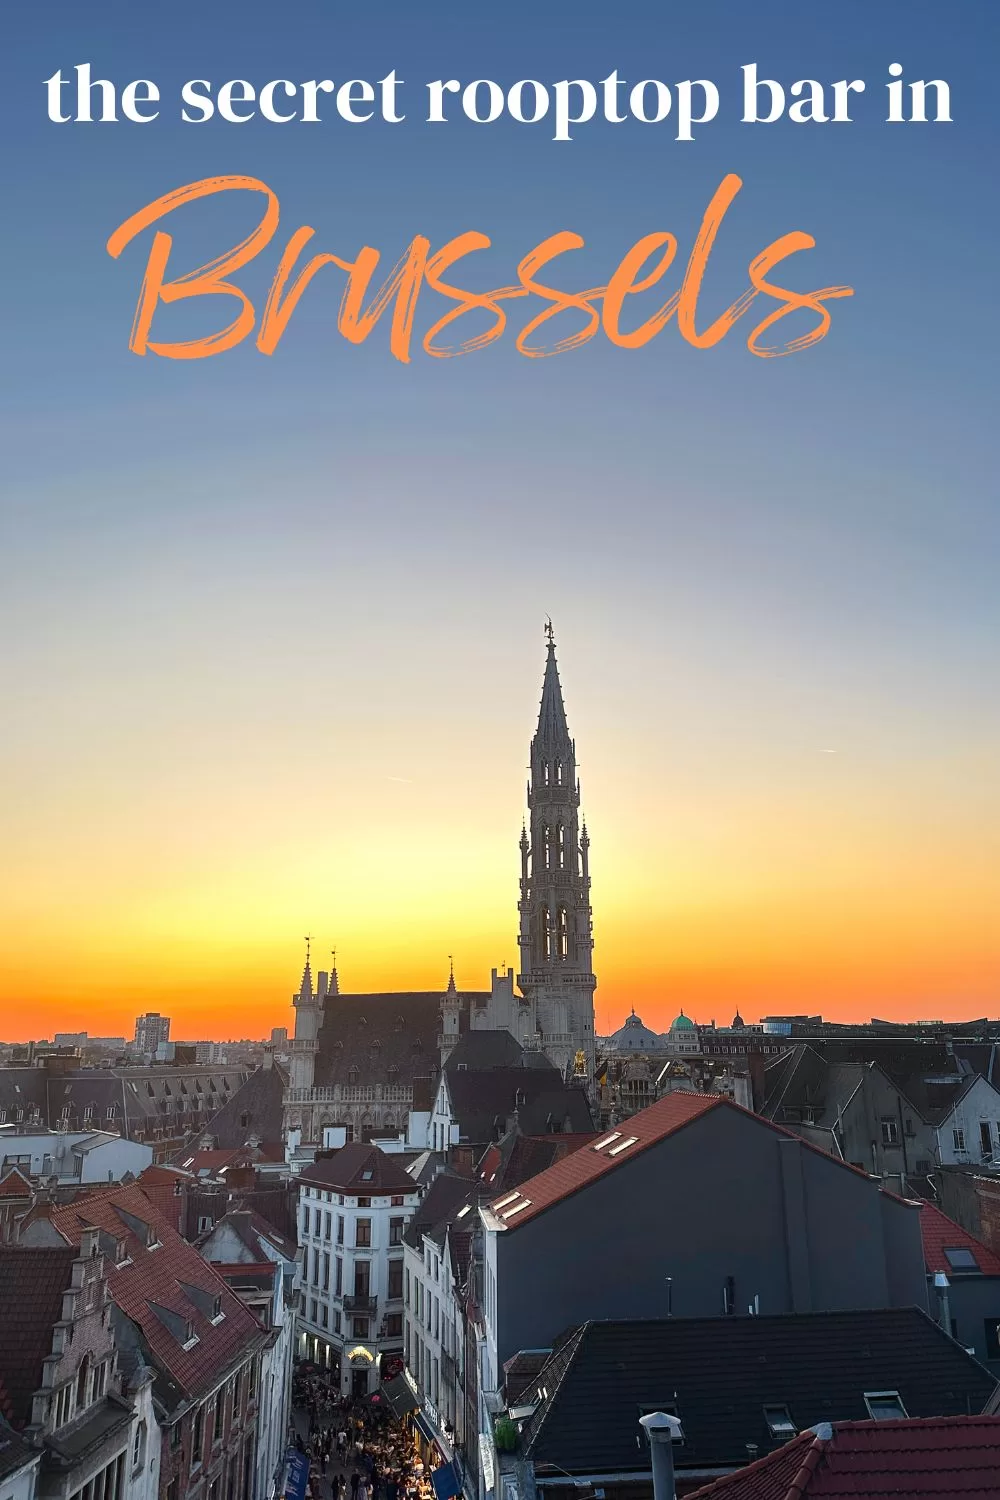 Visiting the Secret Brussels Rooftop Bar PIN